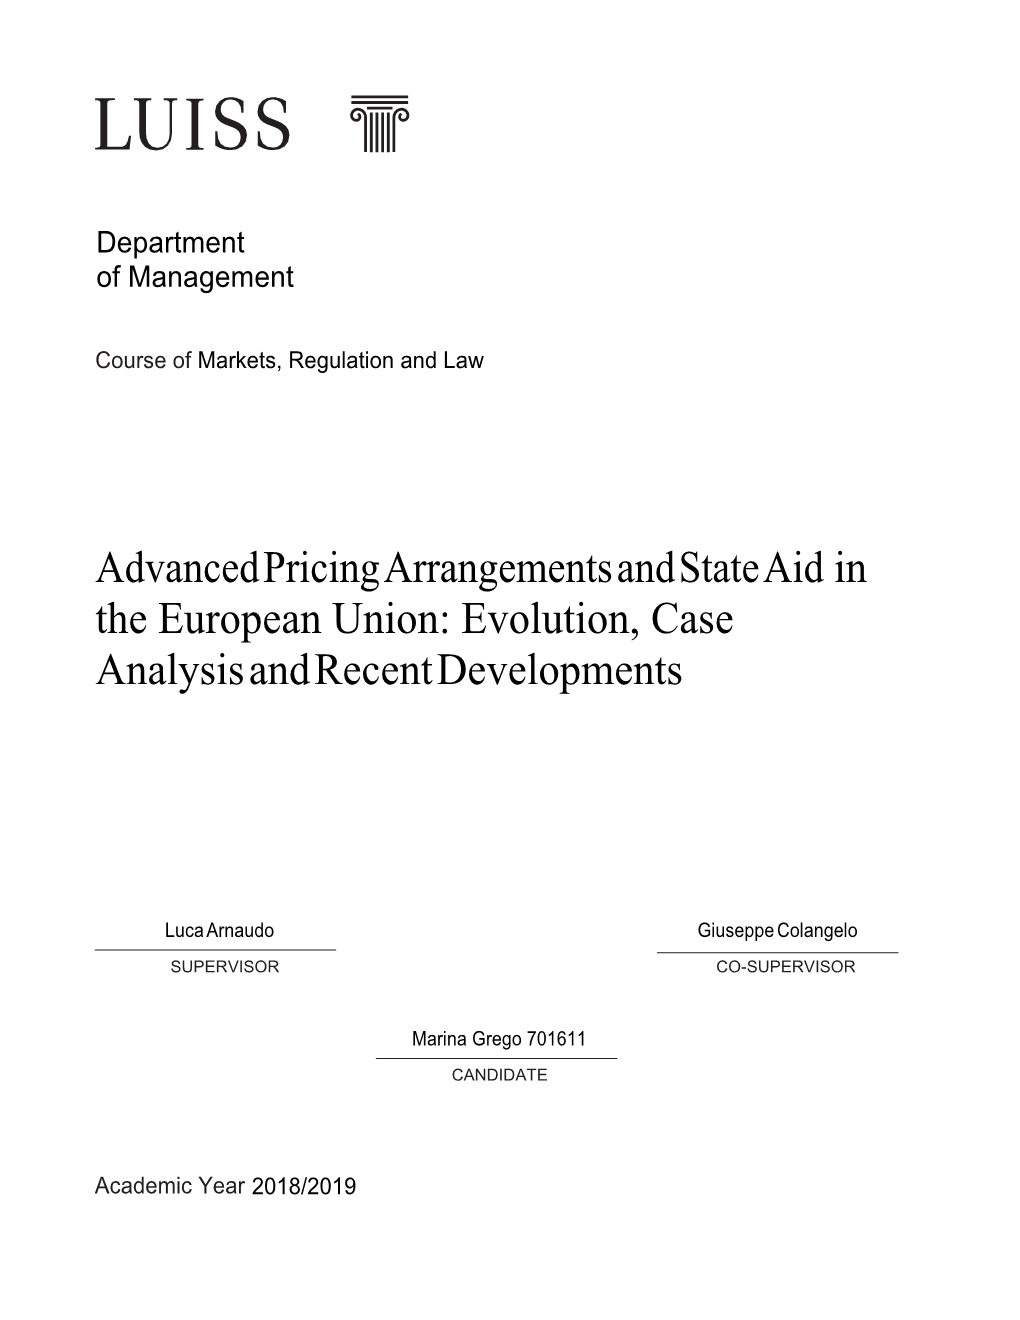 Advanced Pricing Arrangements and State Aid in the European Union: Evolution, Case Analysis and Recent Developments